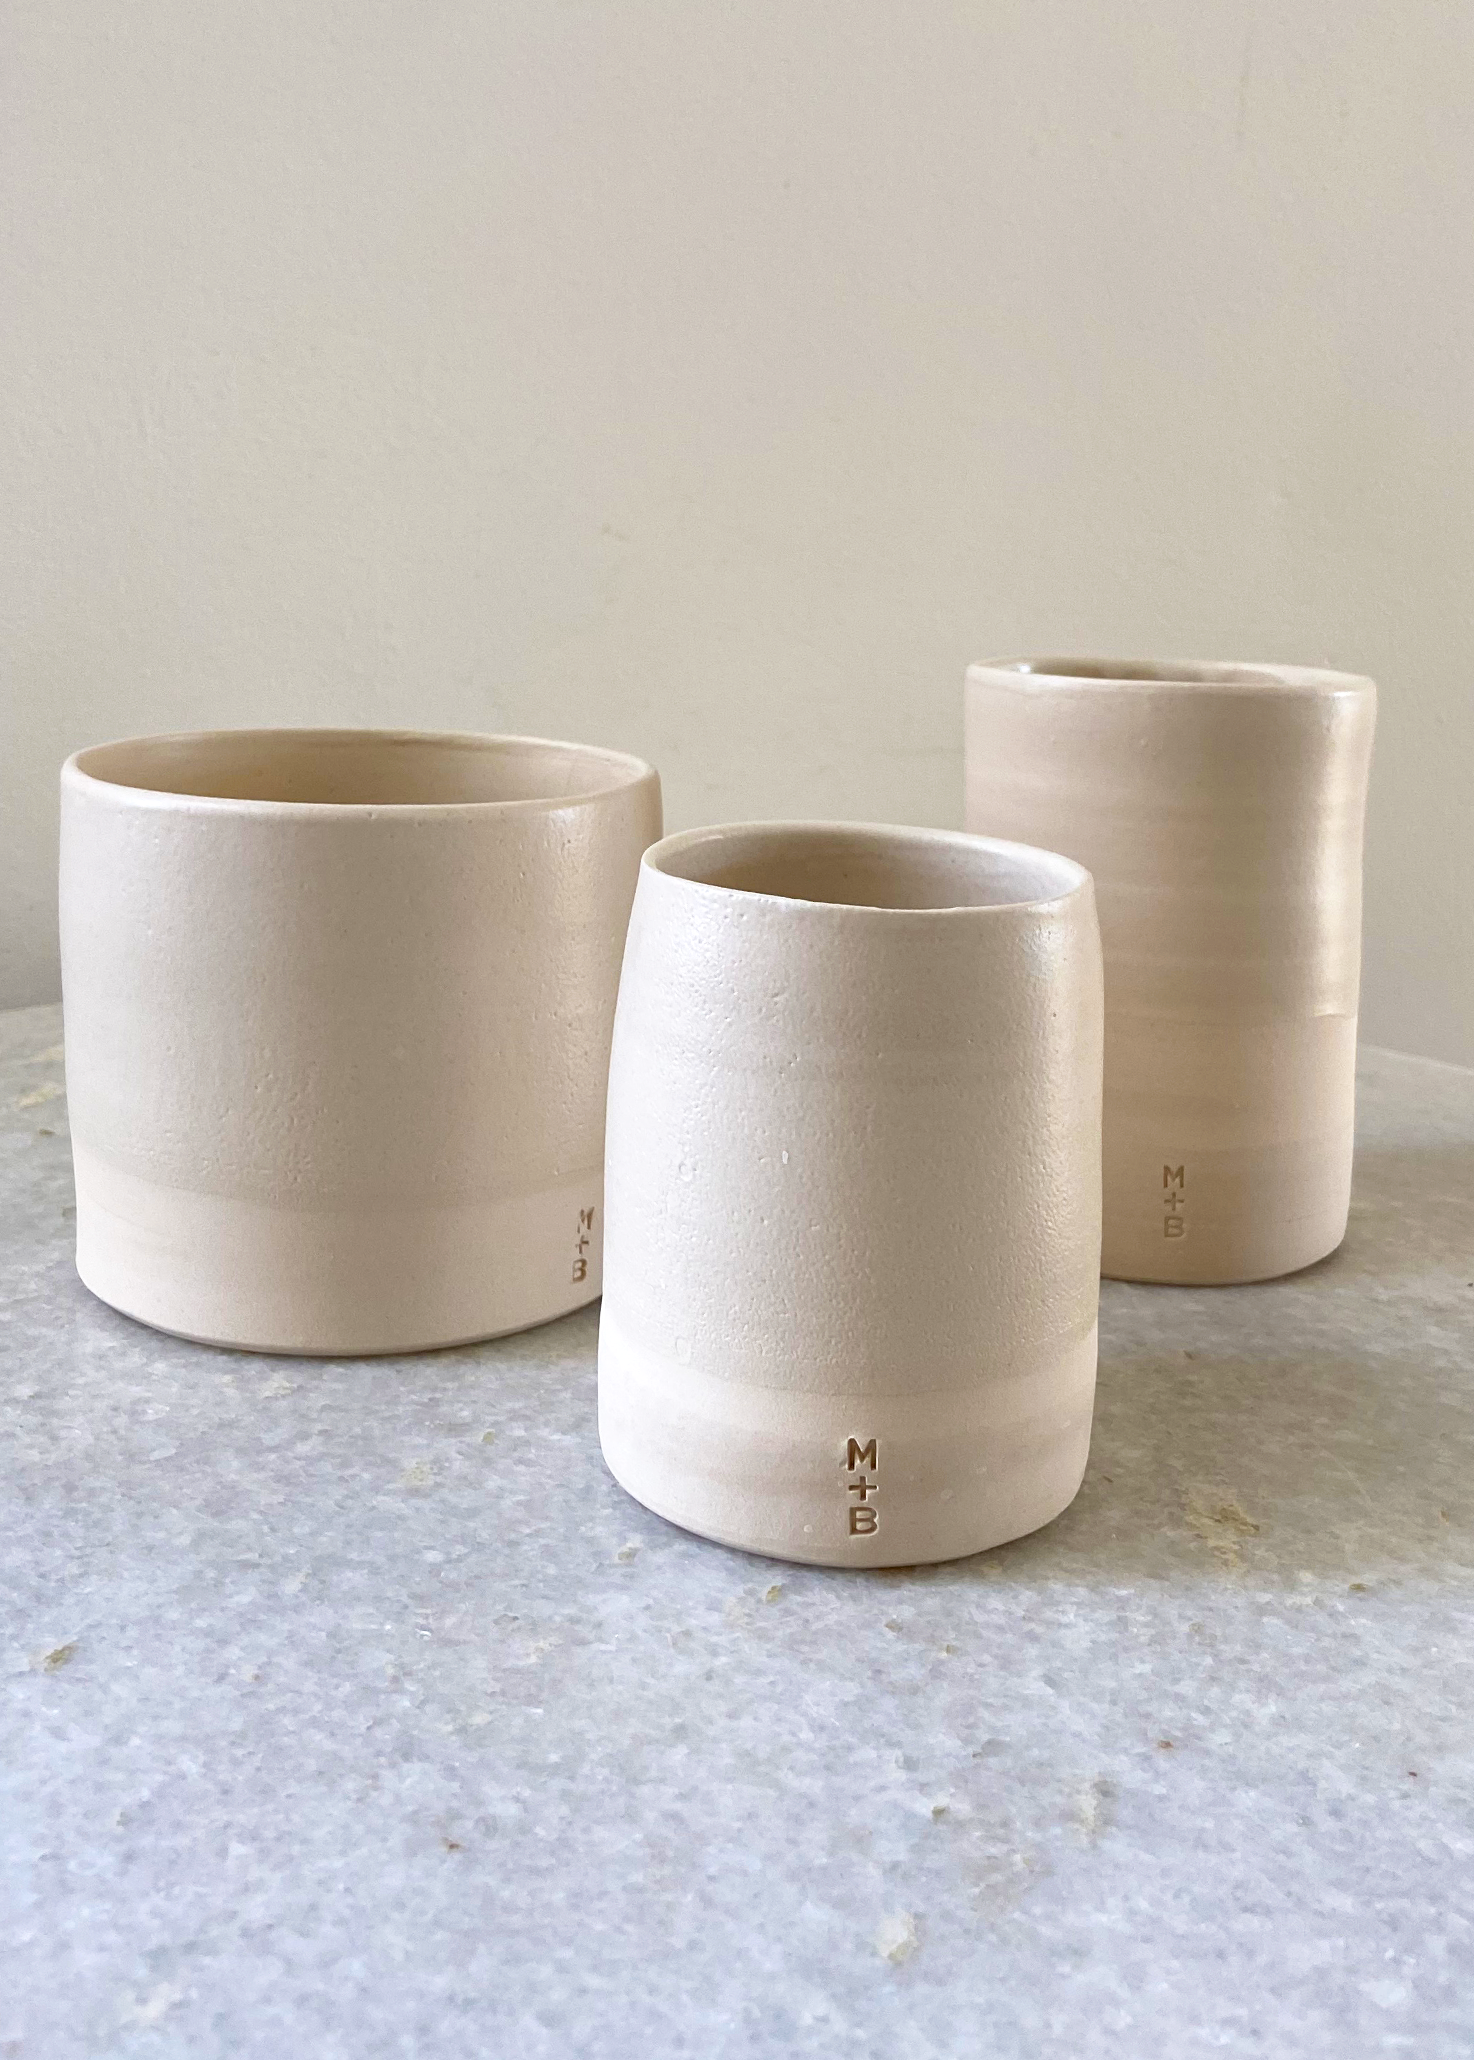 Cylinders by Gill Marles